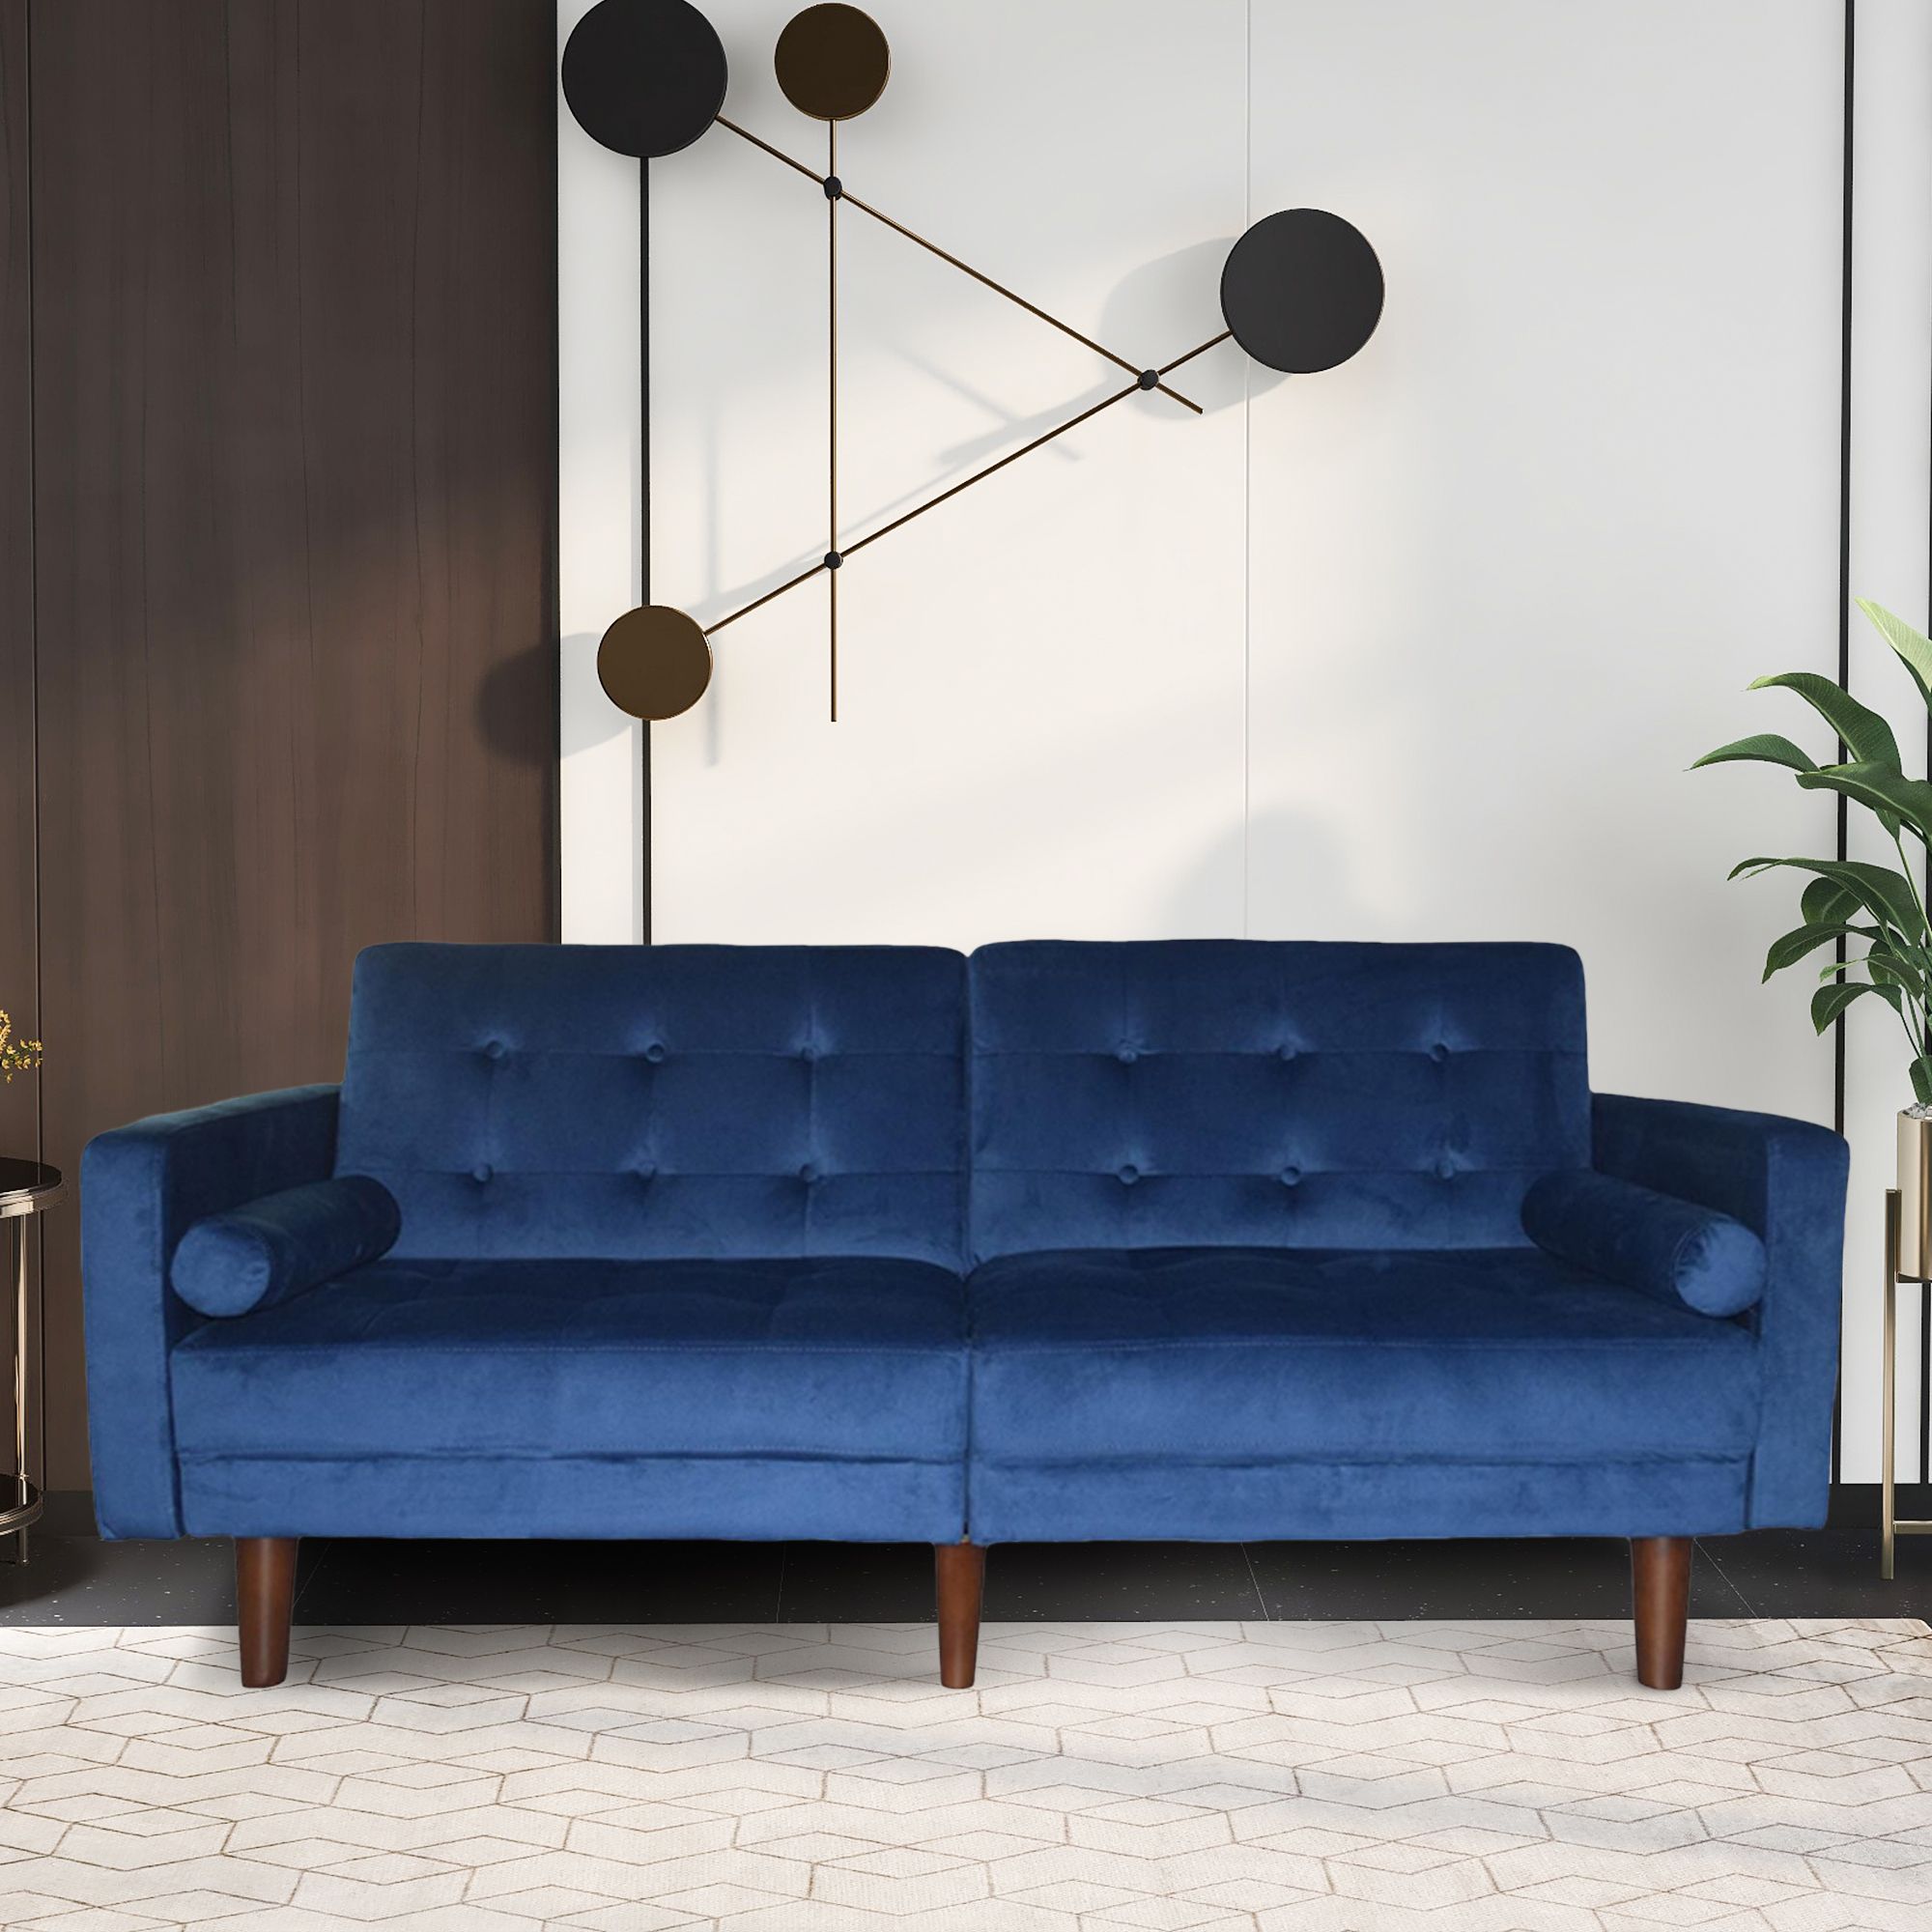 Blue Sofa Bed, Mid Century Modern Velvet Upholstered Throughout Well Known Dove Mid Century Sectional Sofas Dark Blue (View 3 of 25)